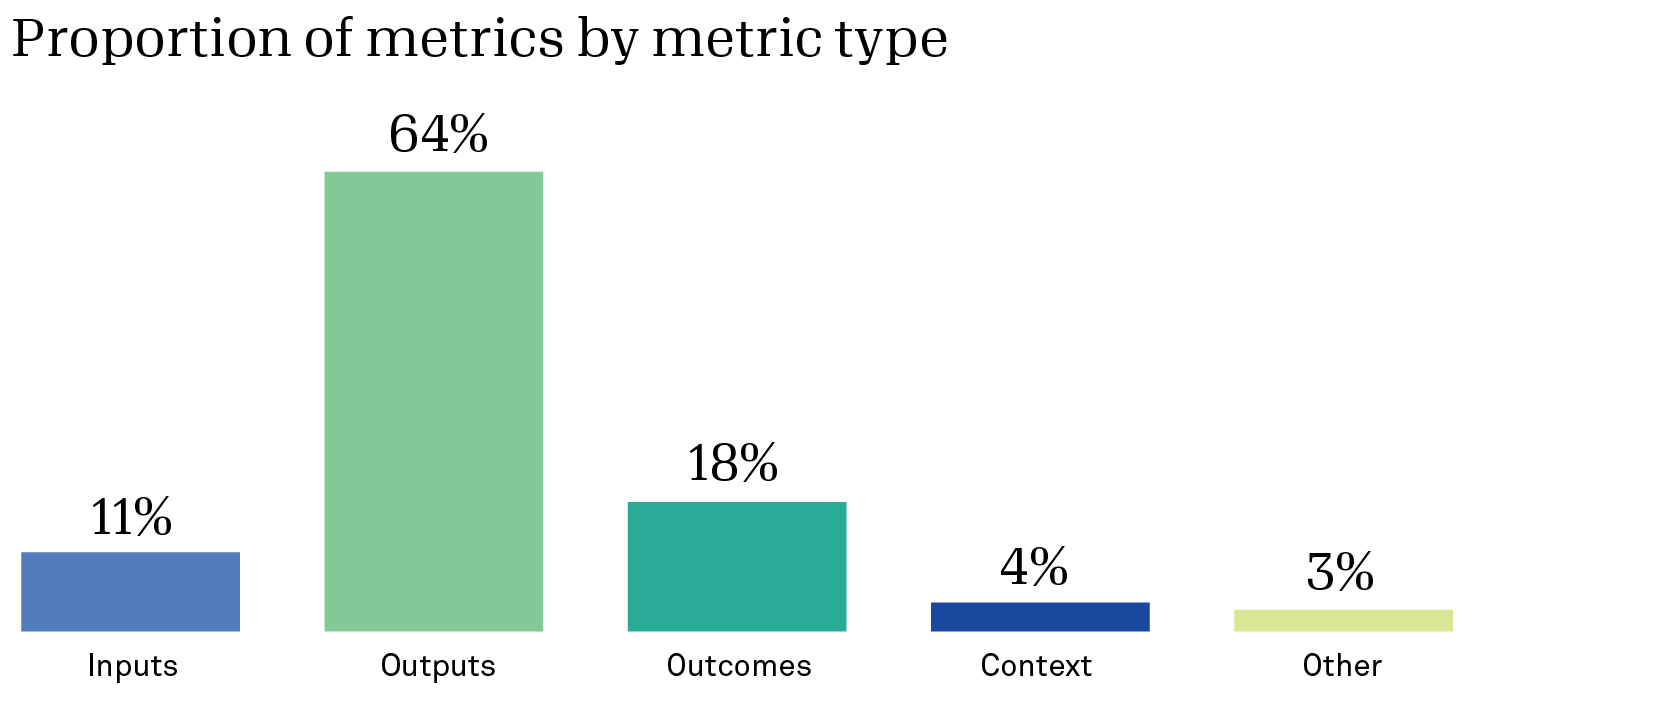 Proportion of metrics by type